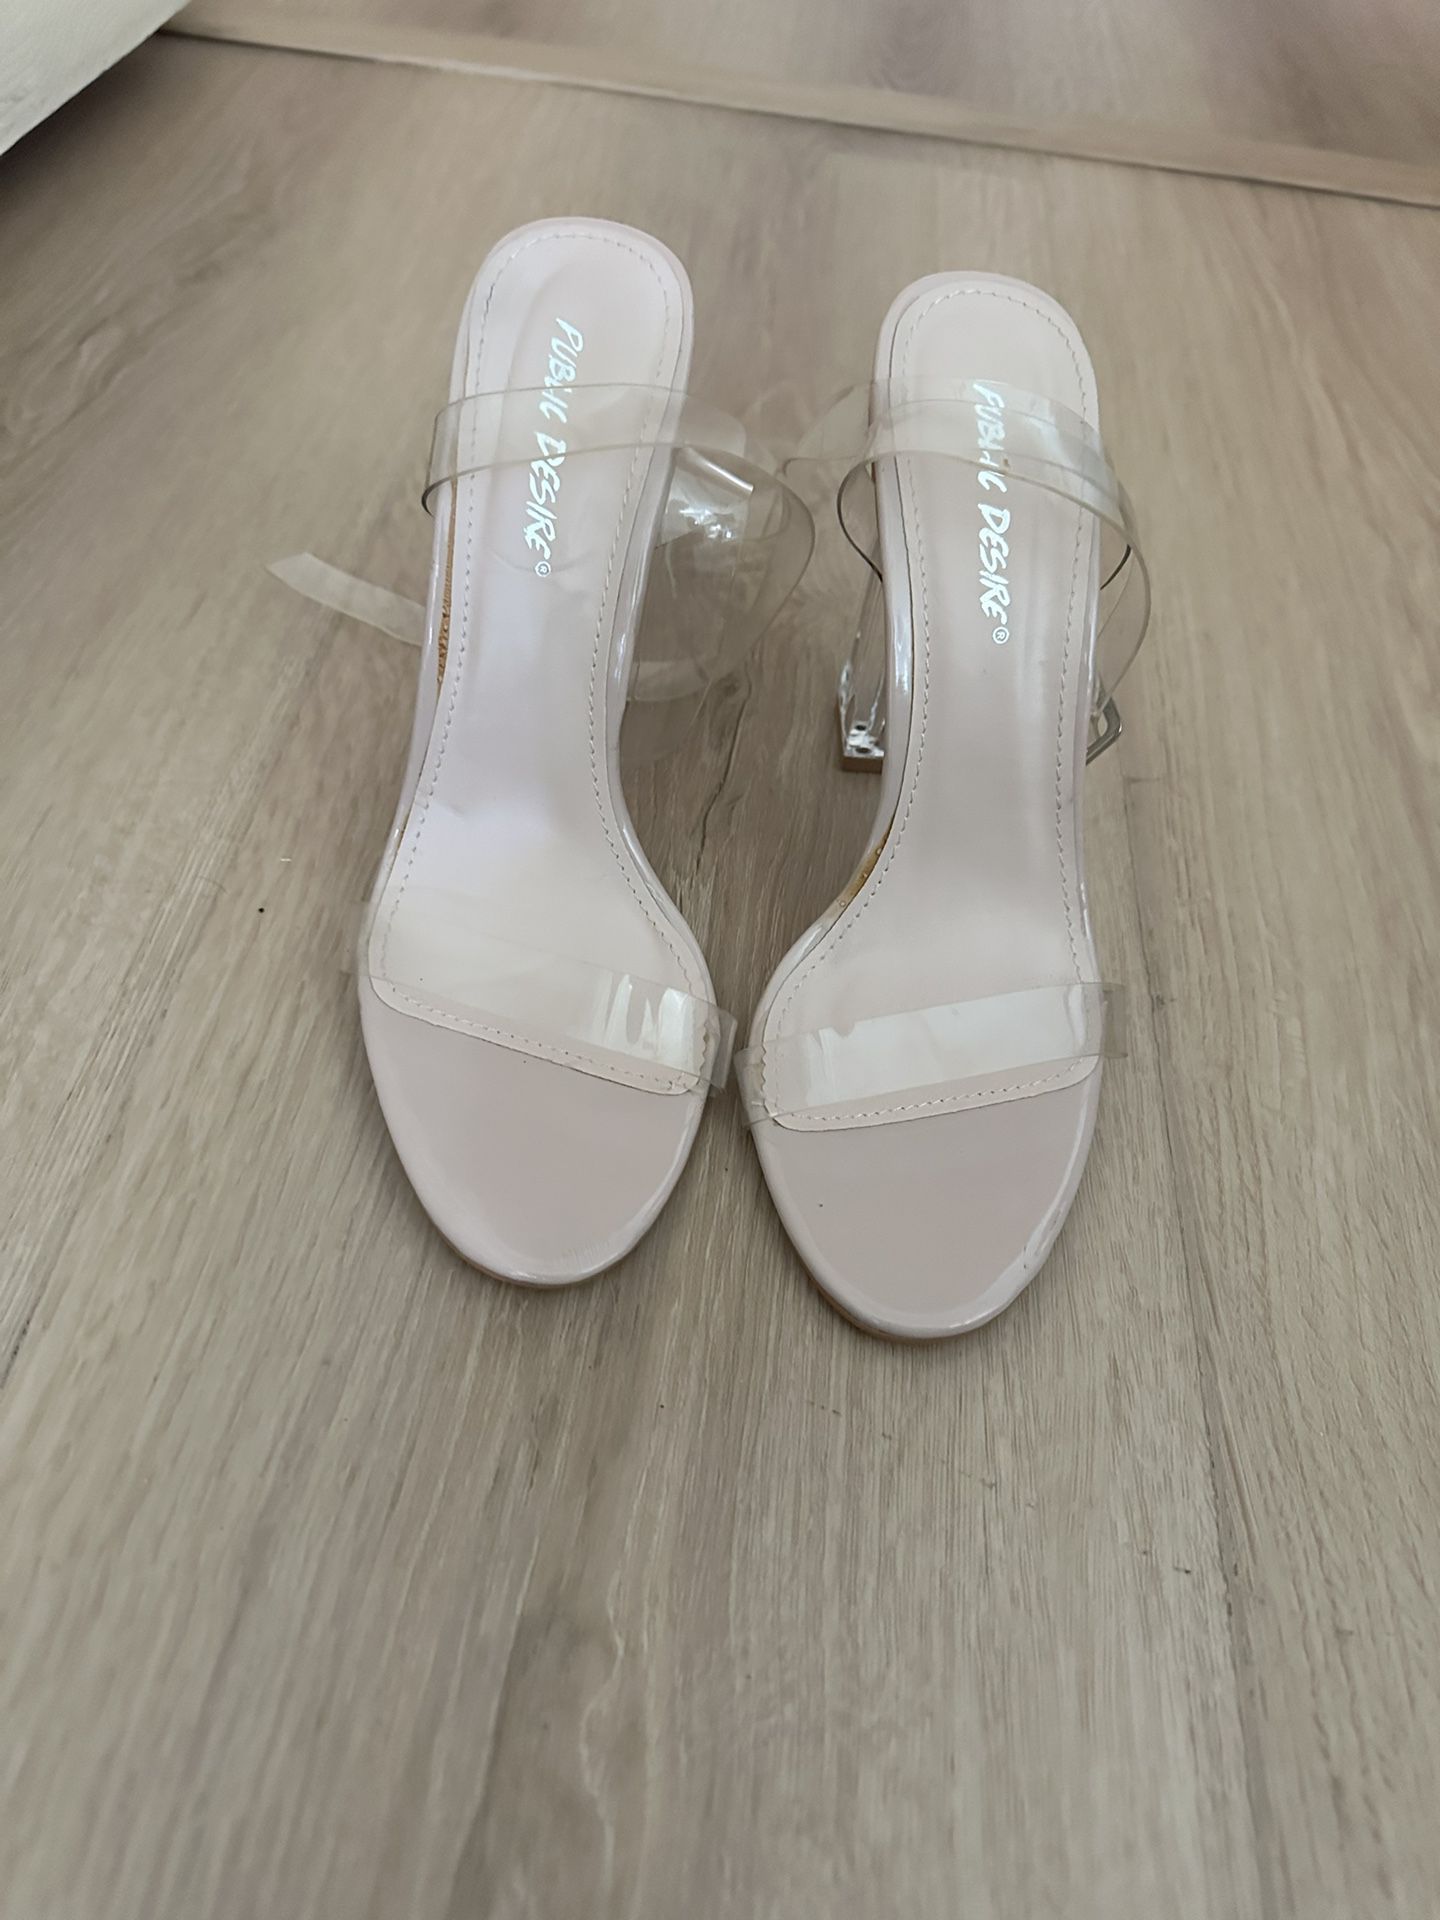 Clear Band/clear Heel 